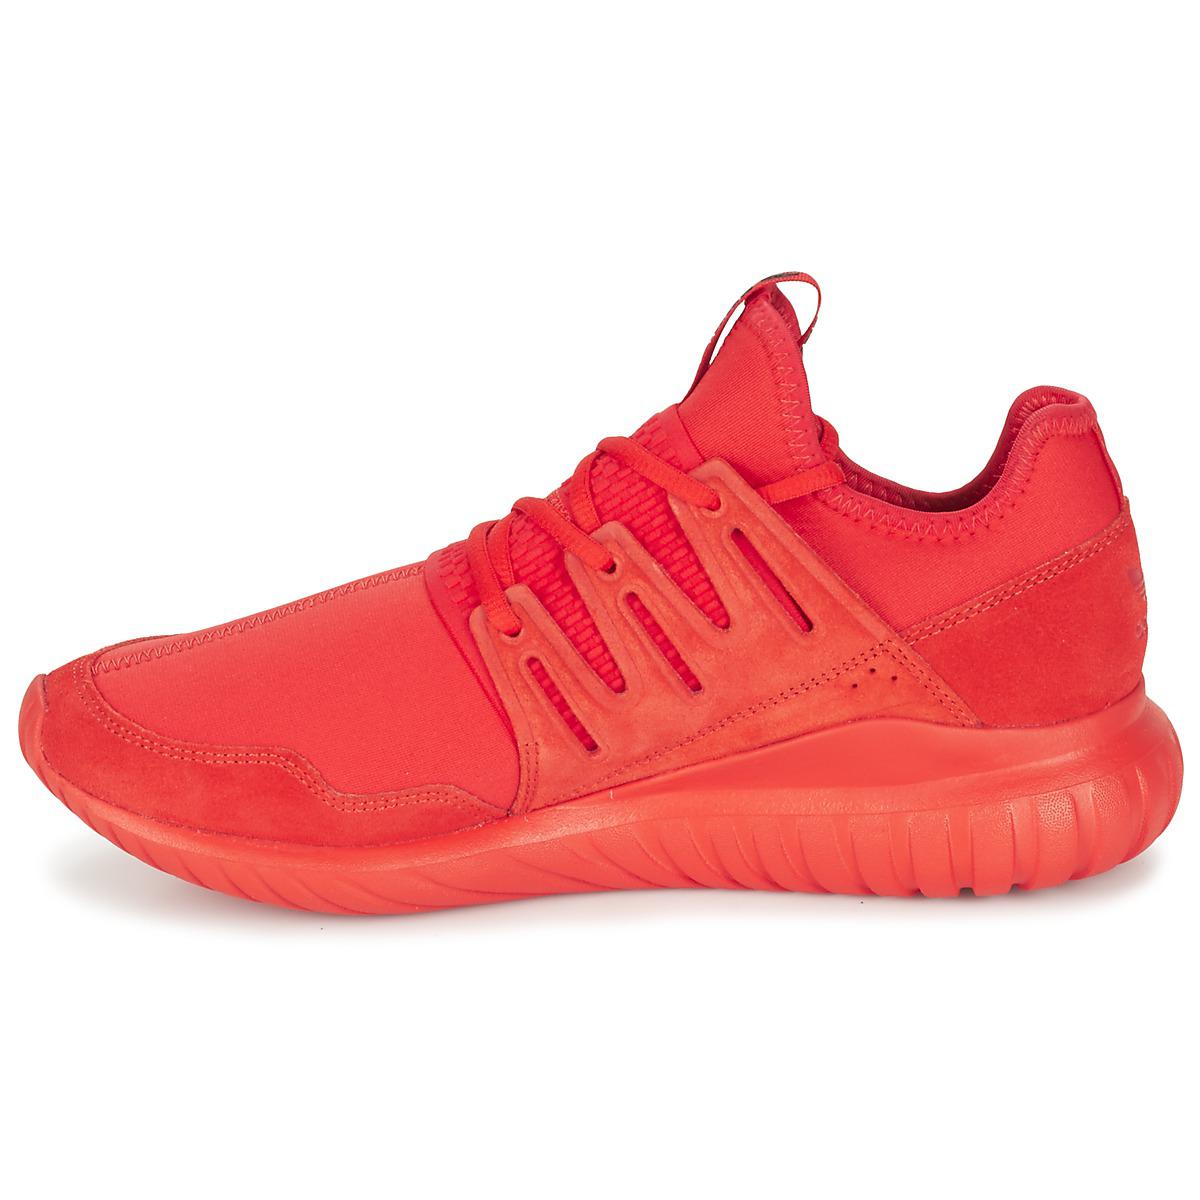 Adidas Tubular Radial Women S Shoes Trainers In Red Lyst